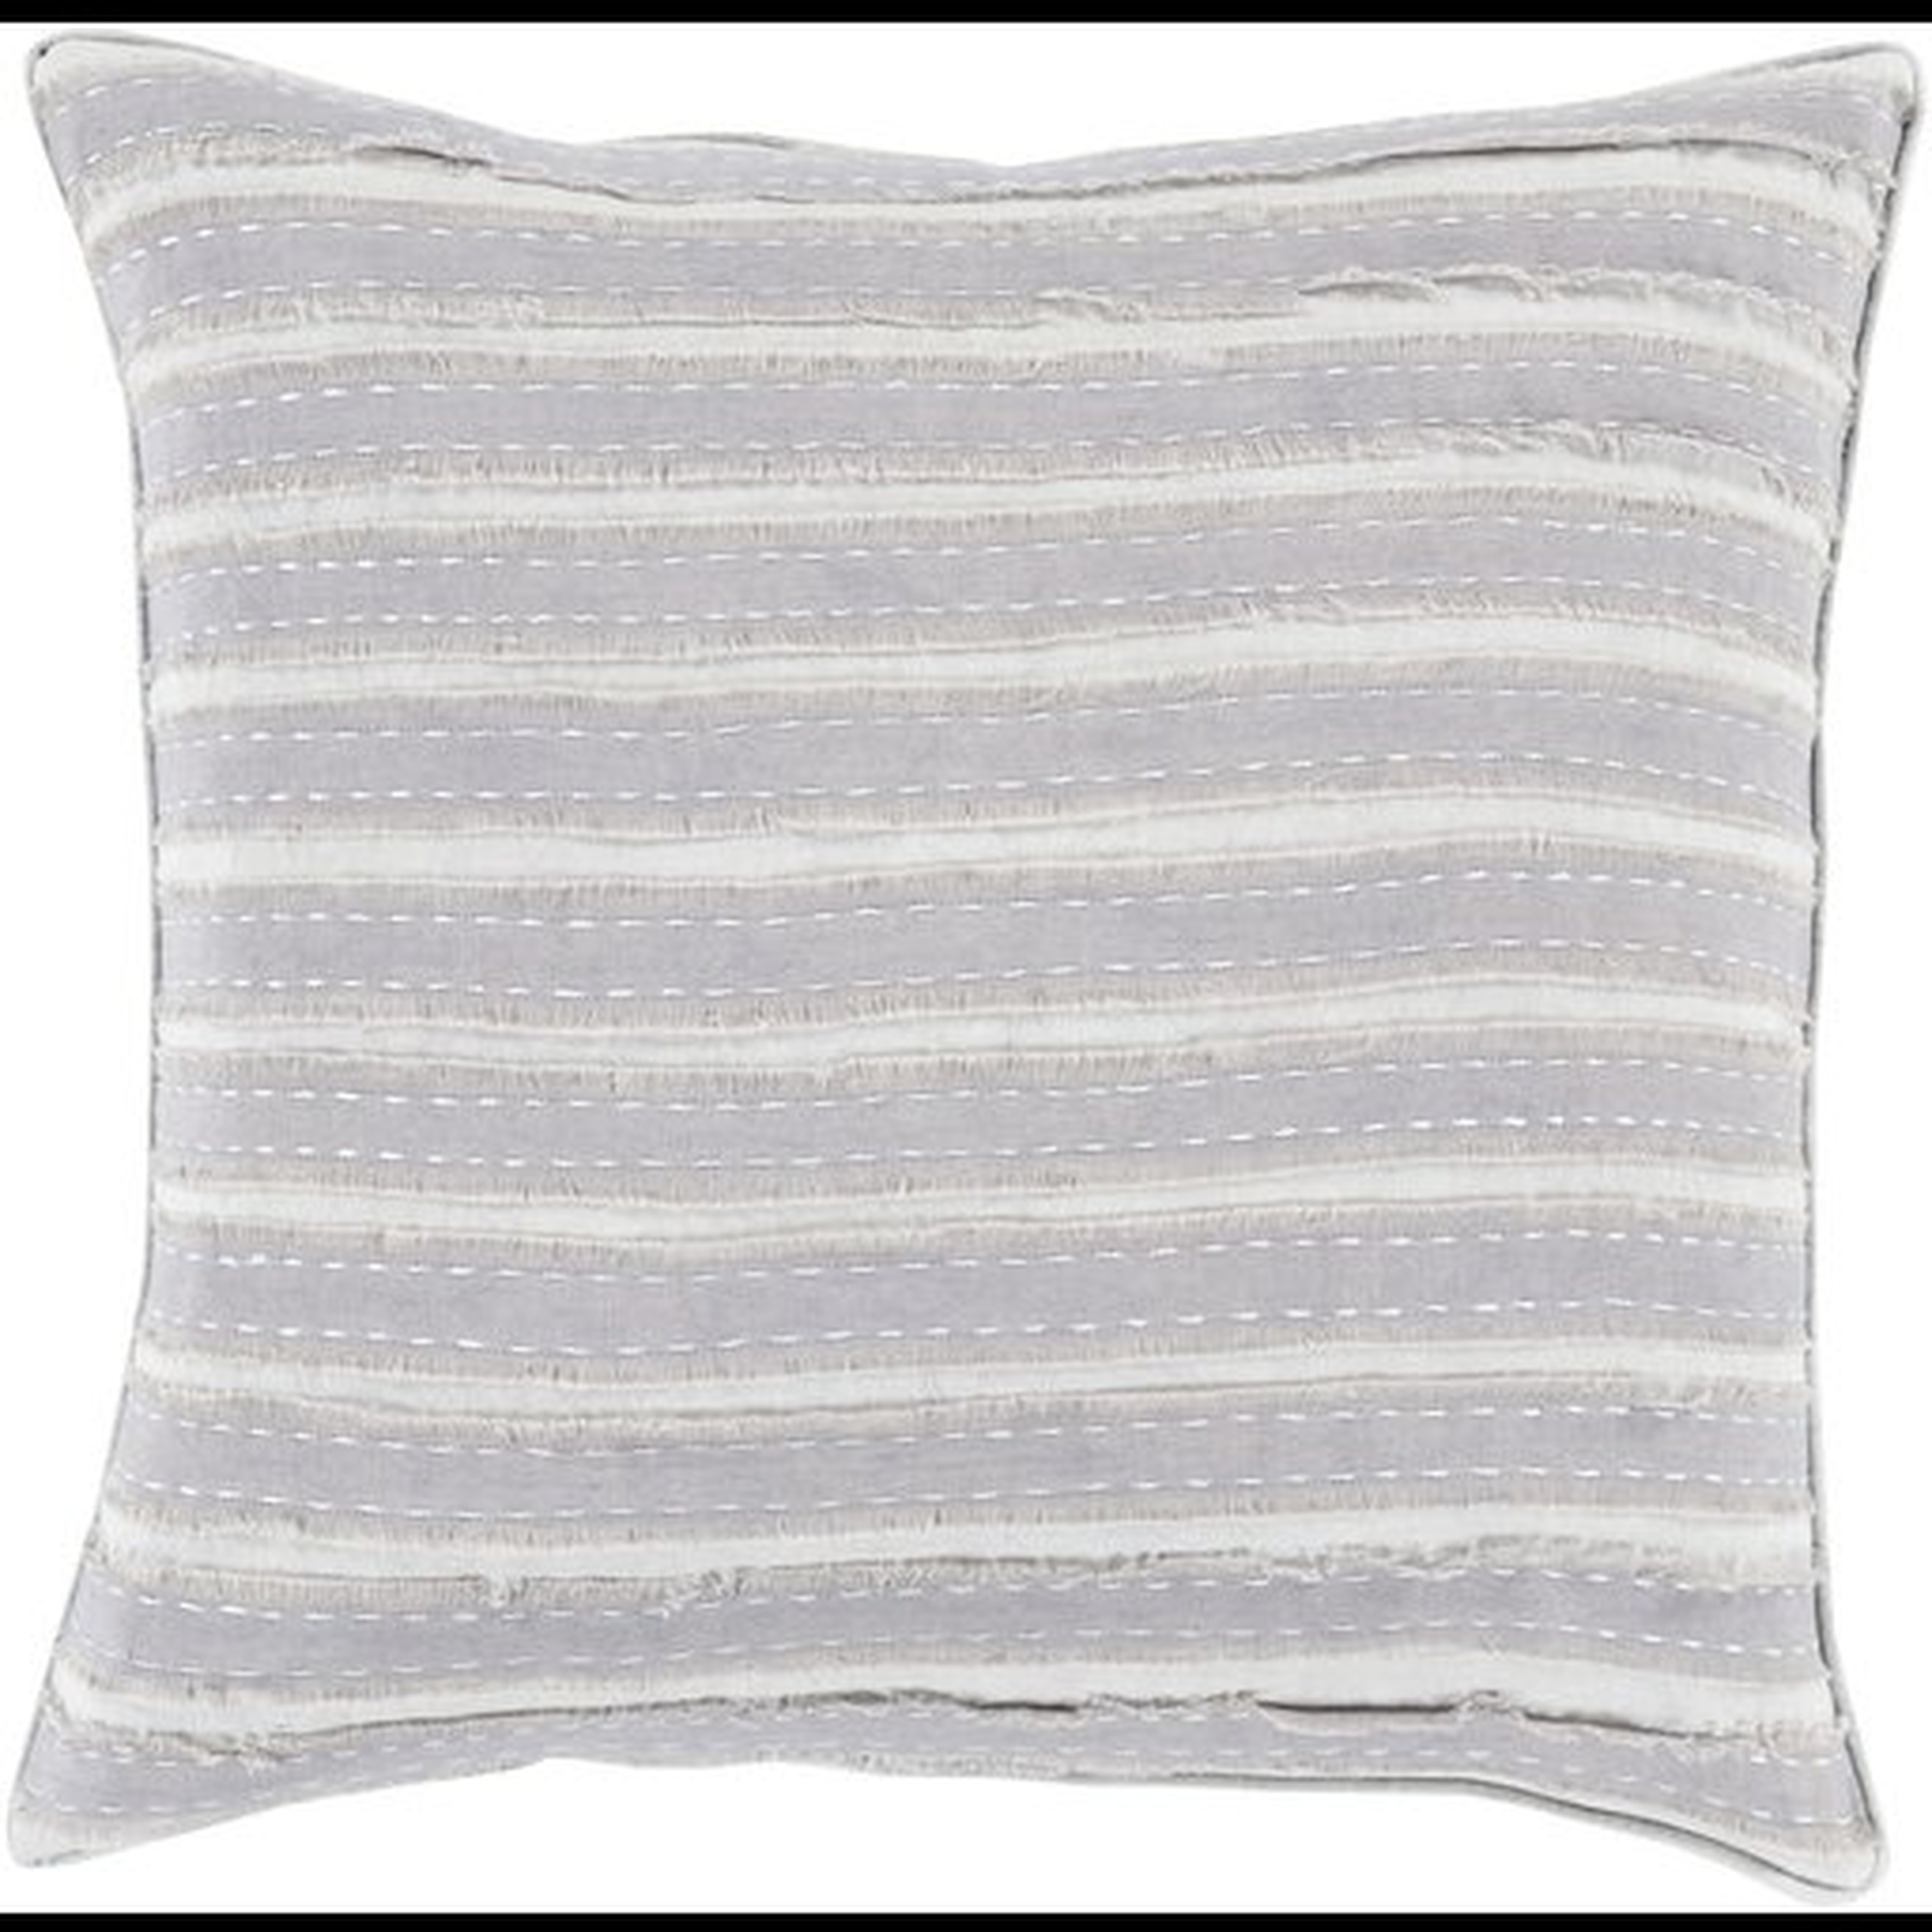 Willow Throw Pillow, 18" x 18", with down insert - Surya